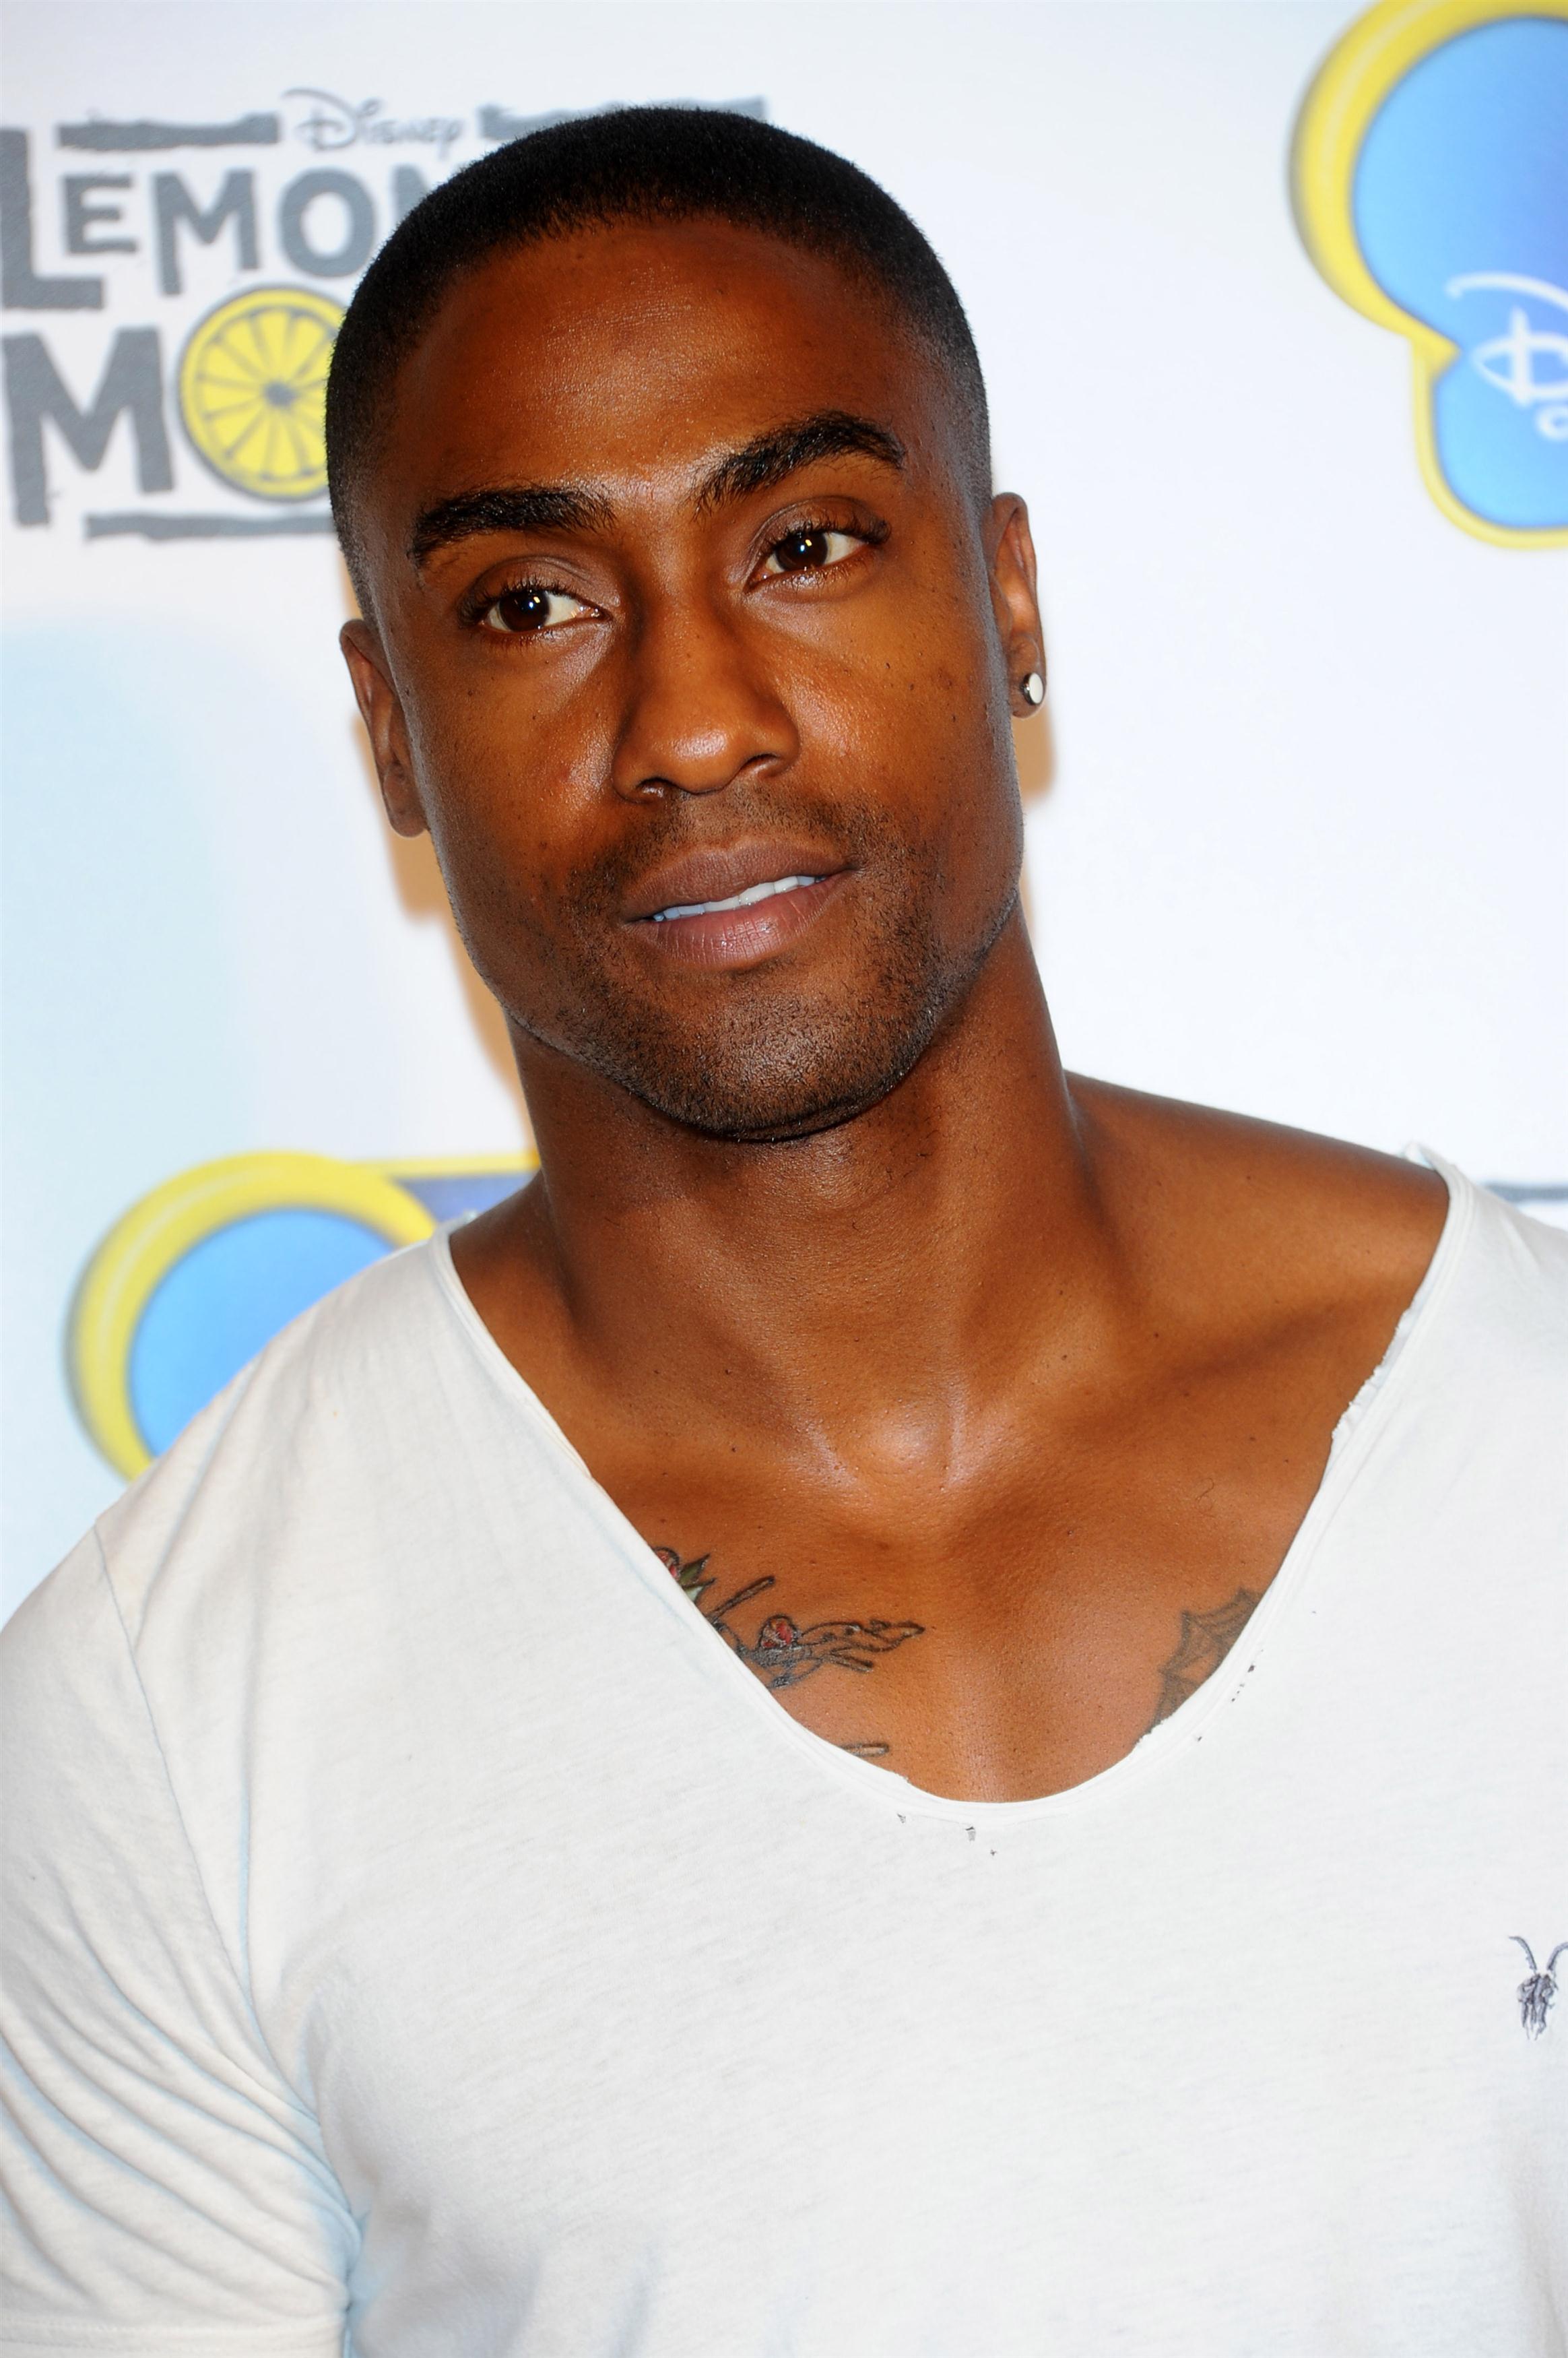 Simon Webbe - Special Screening of Lemonade Mouth | Picture 65767